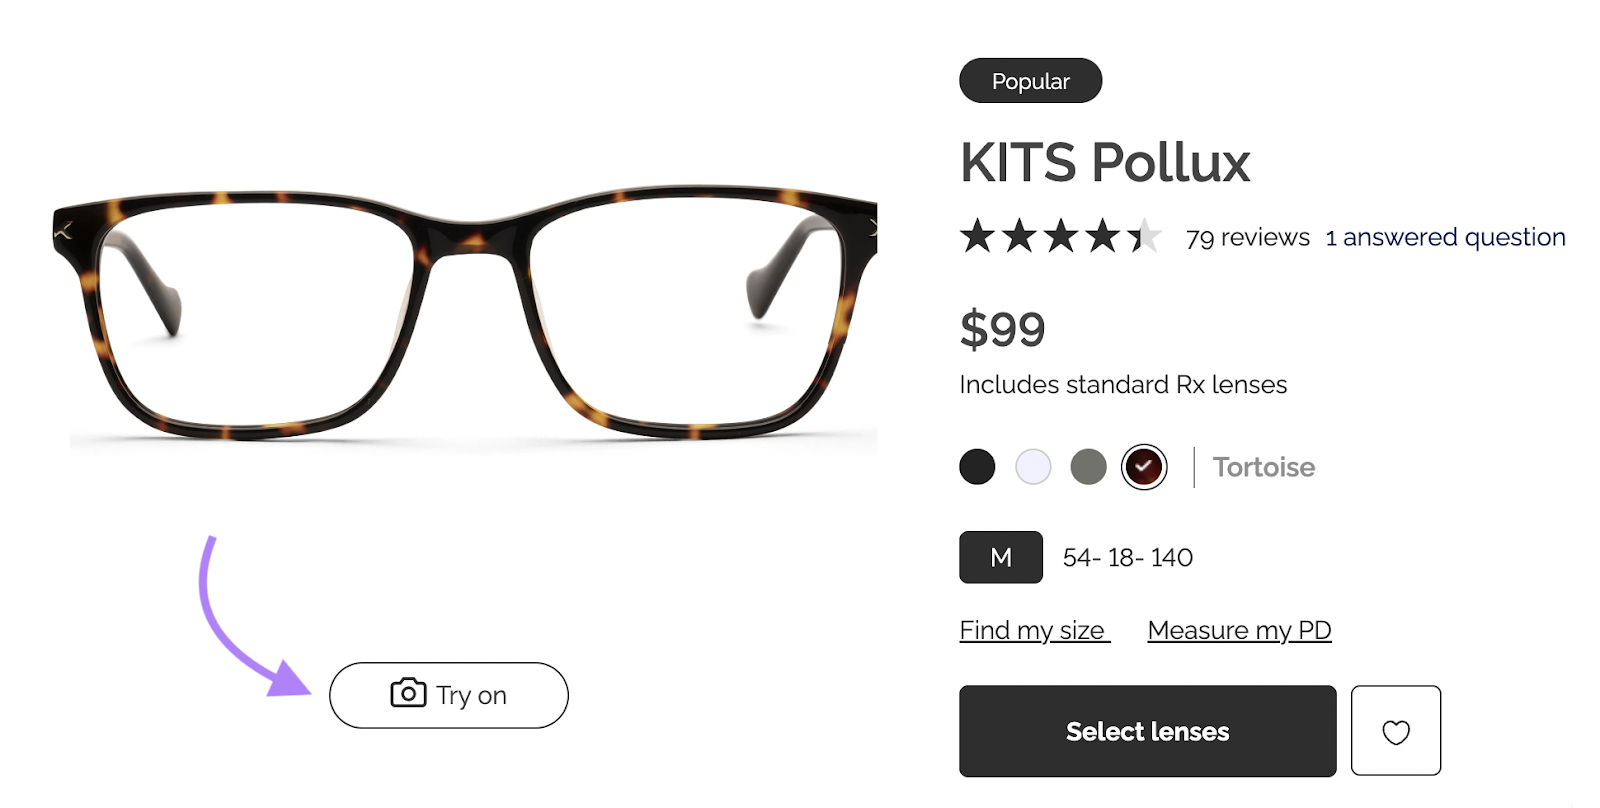 "KITS Pollux" glasses listing with "Try on" button highlighted under the image of the glasses